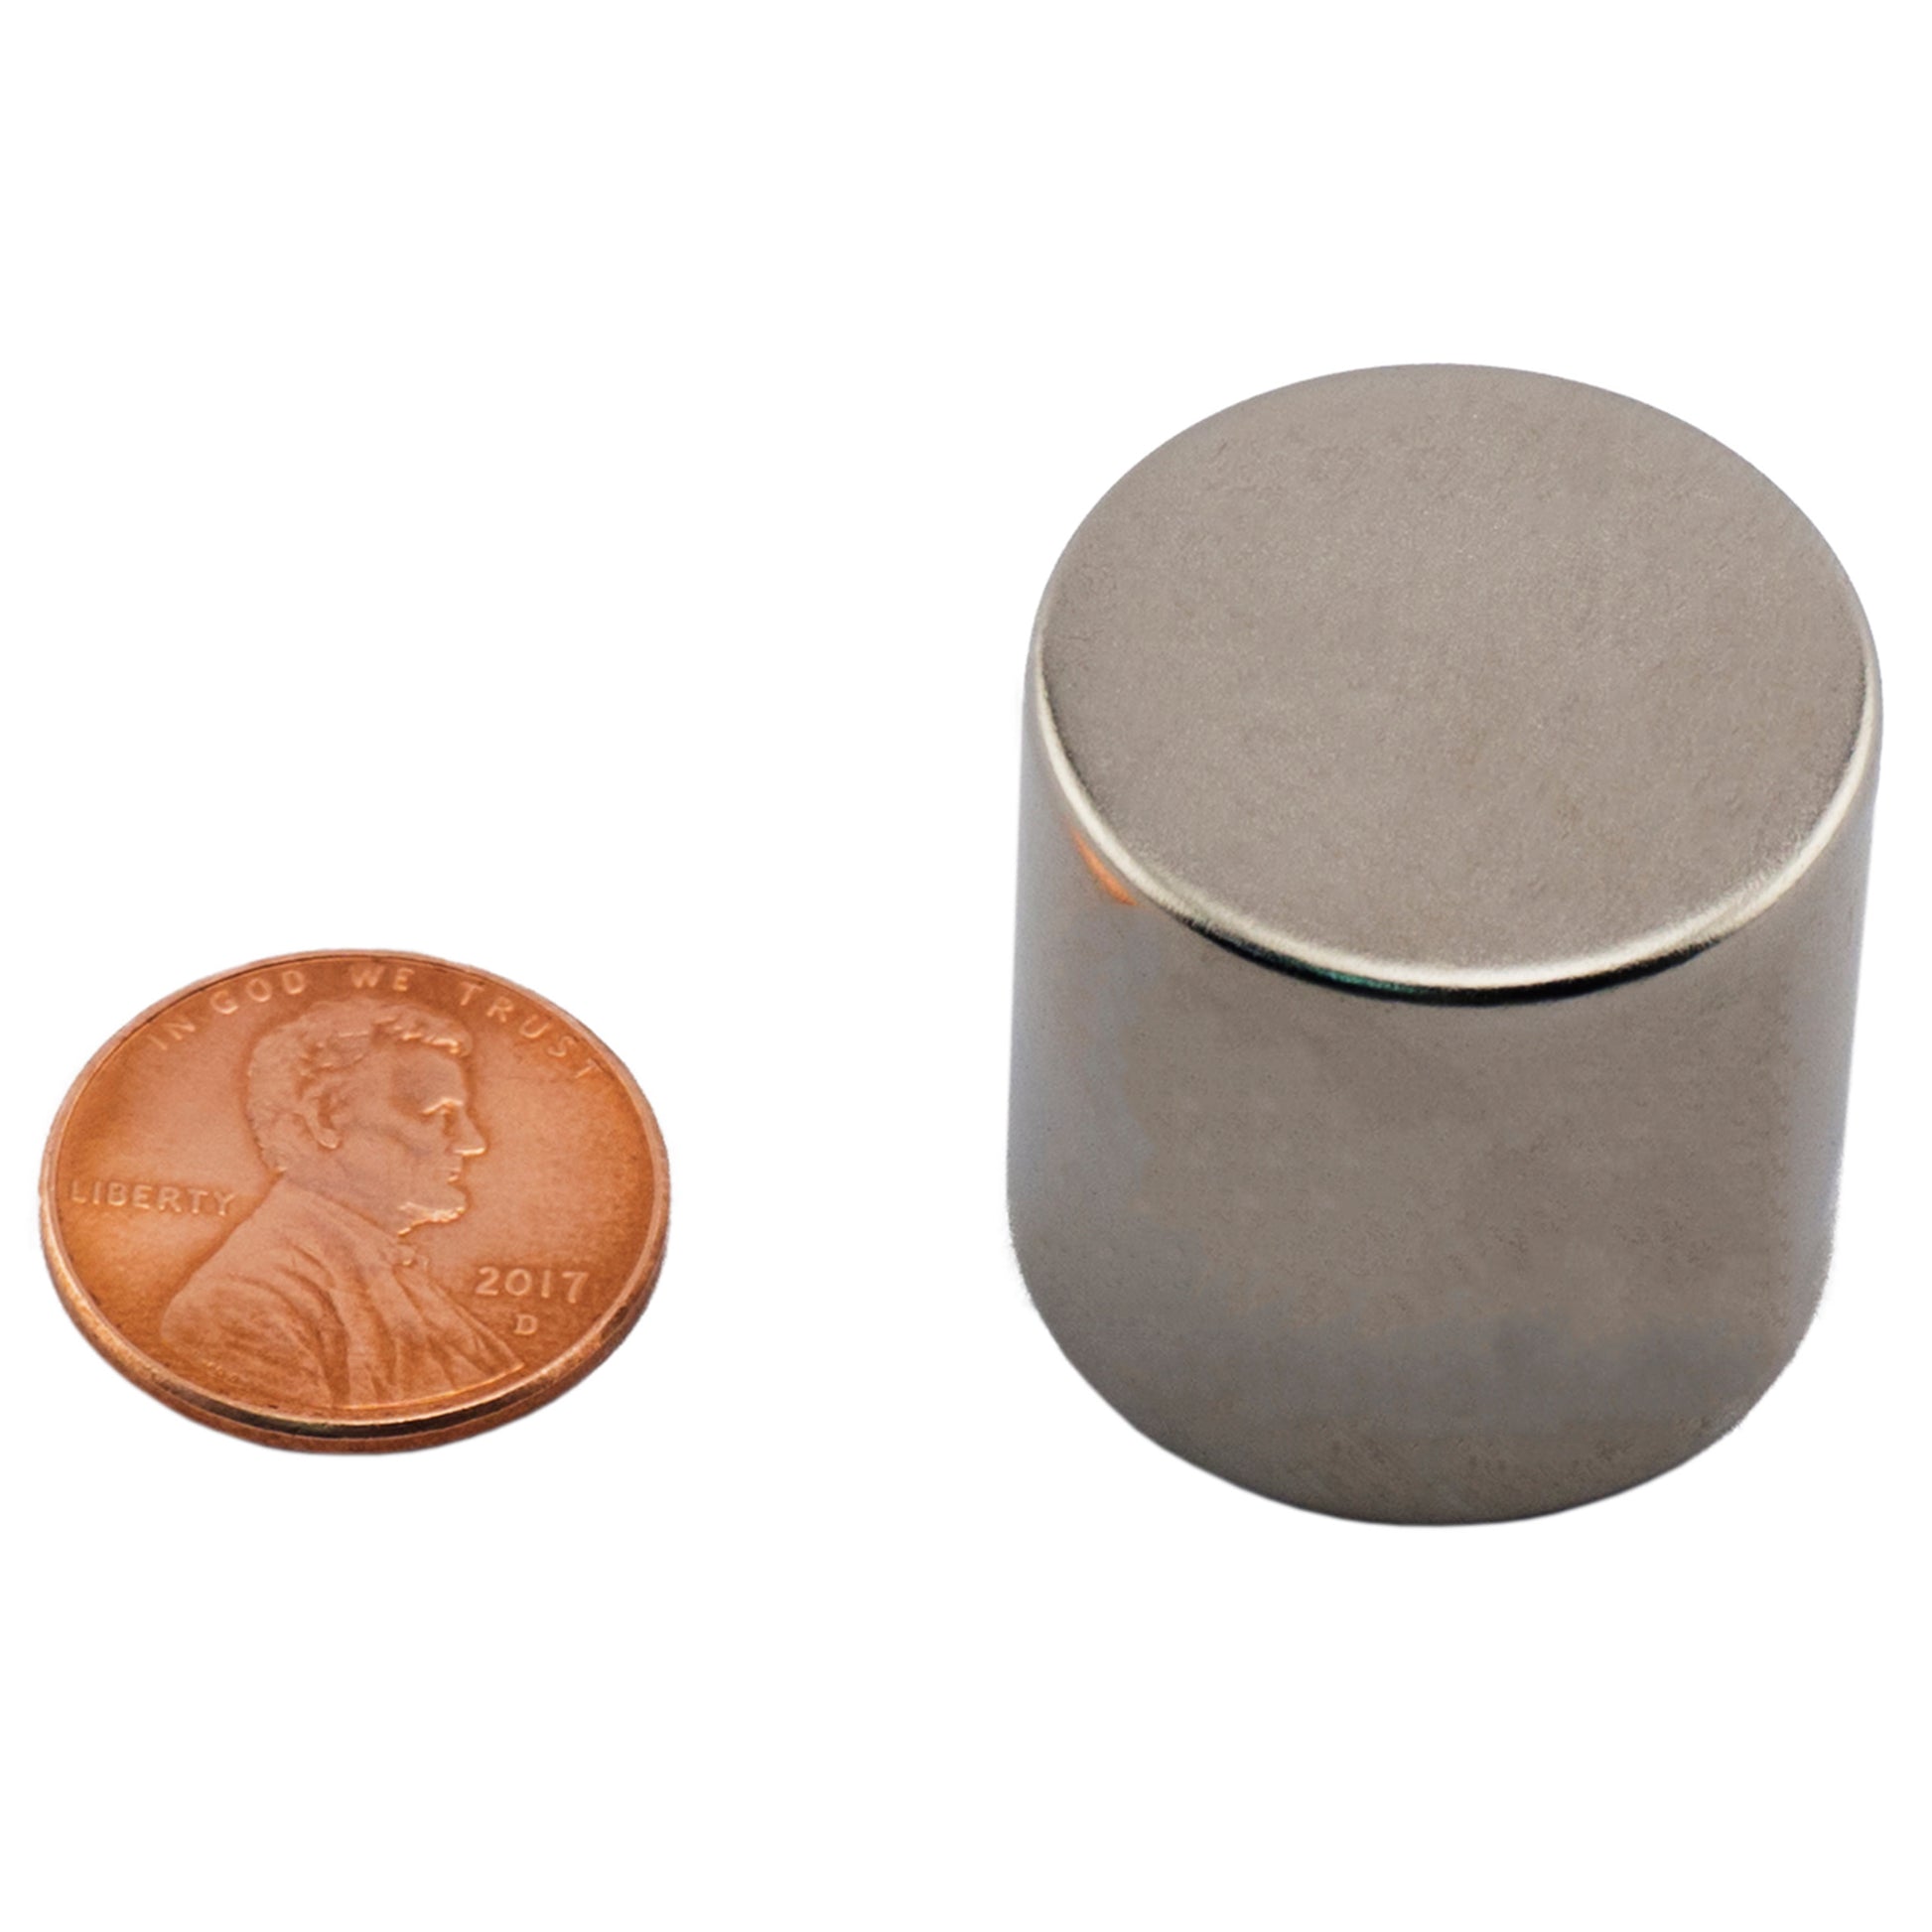 Load image into Gallery viewer, ND010018N Neodymium Disc Magnet - Compared to Penny for Size Reference